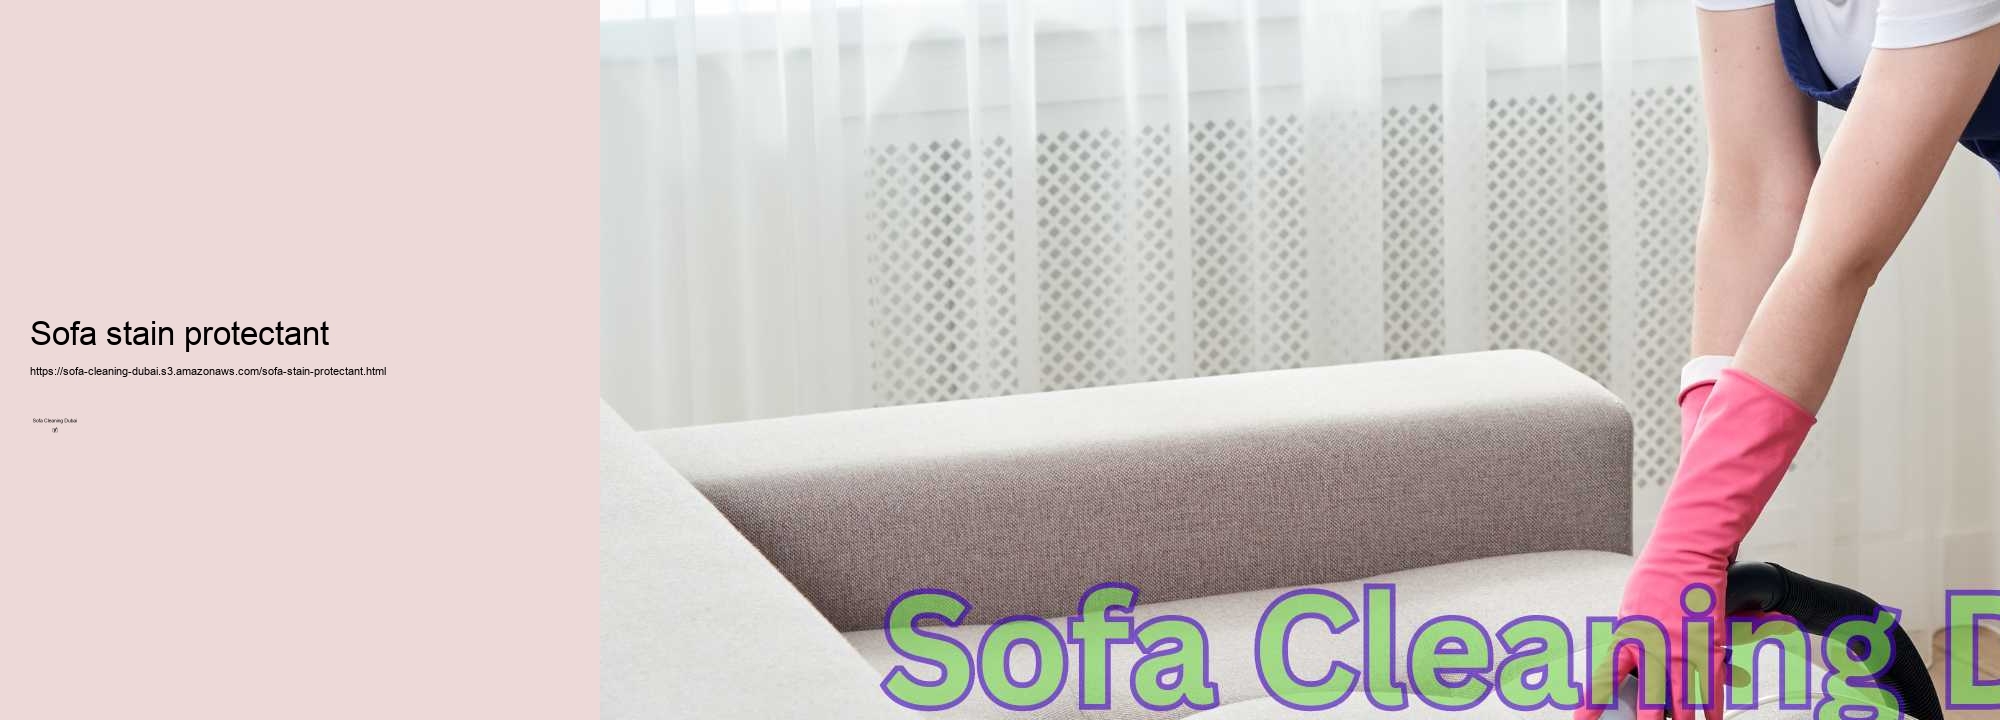 Sofa stain protectant